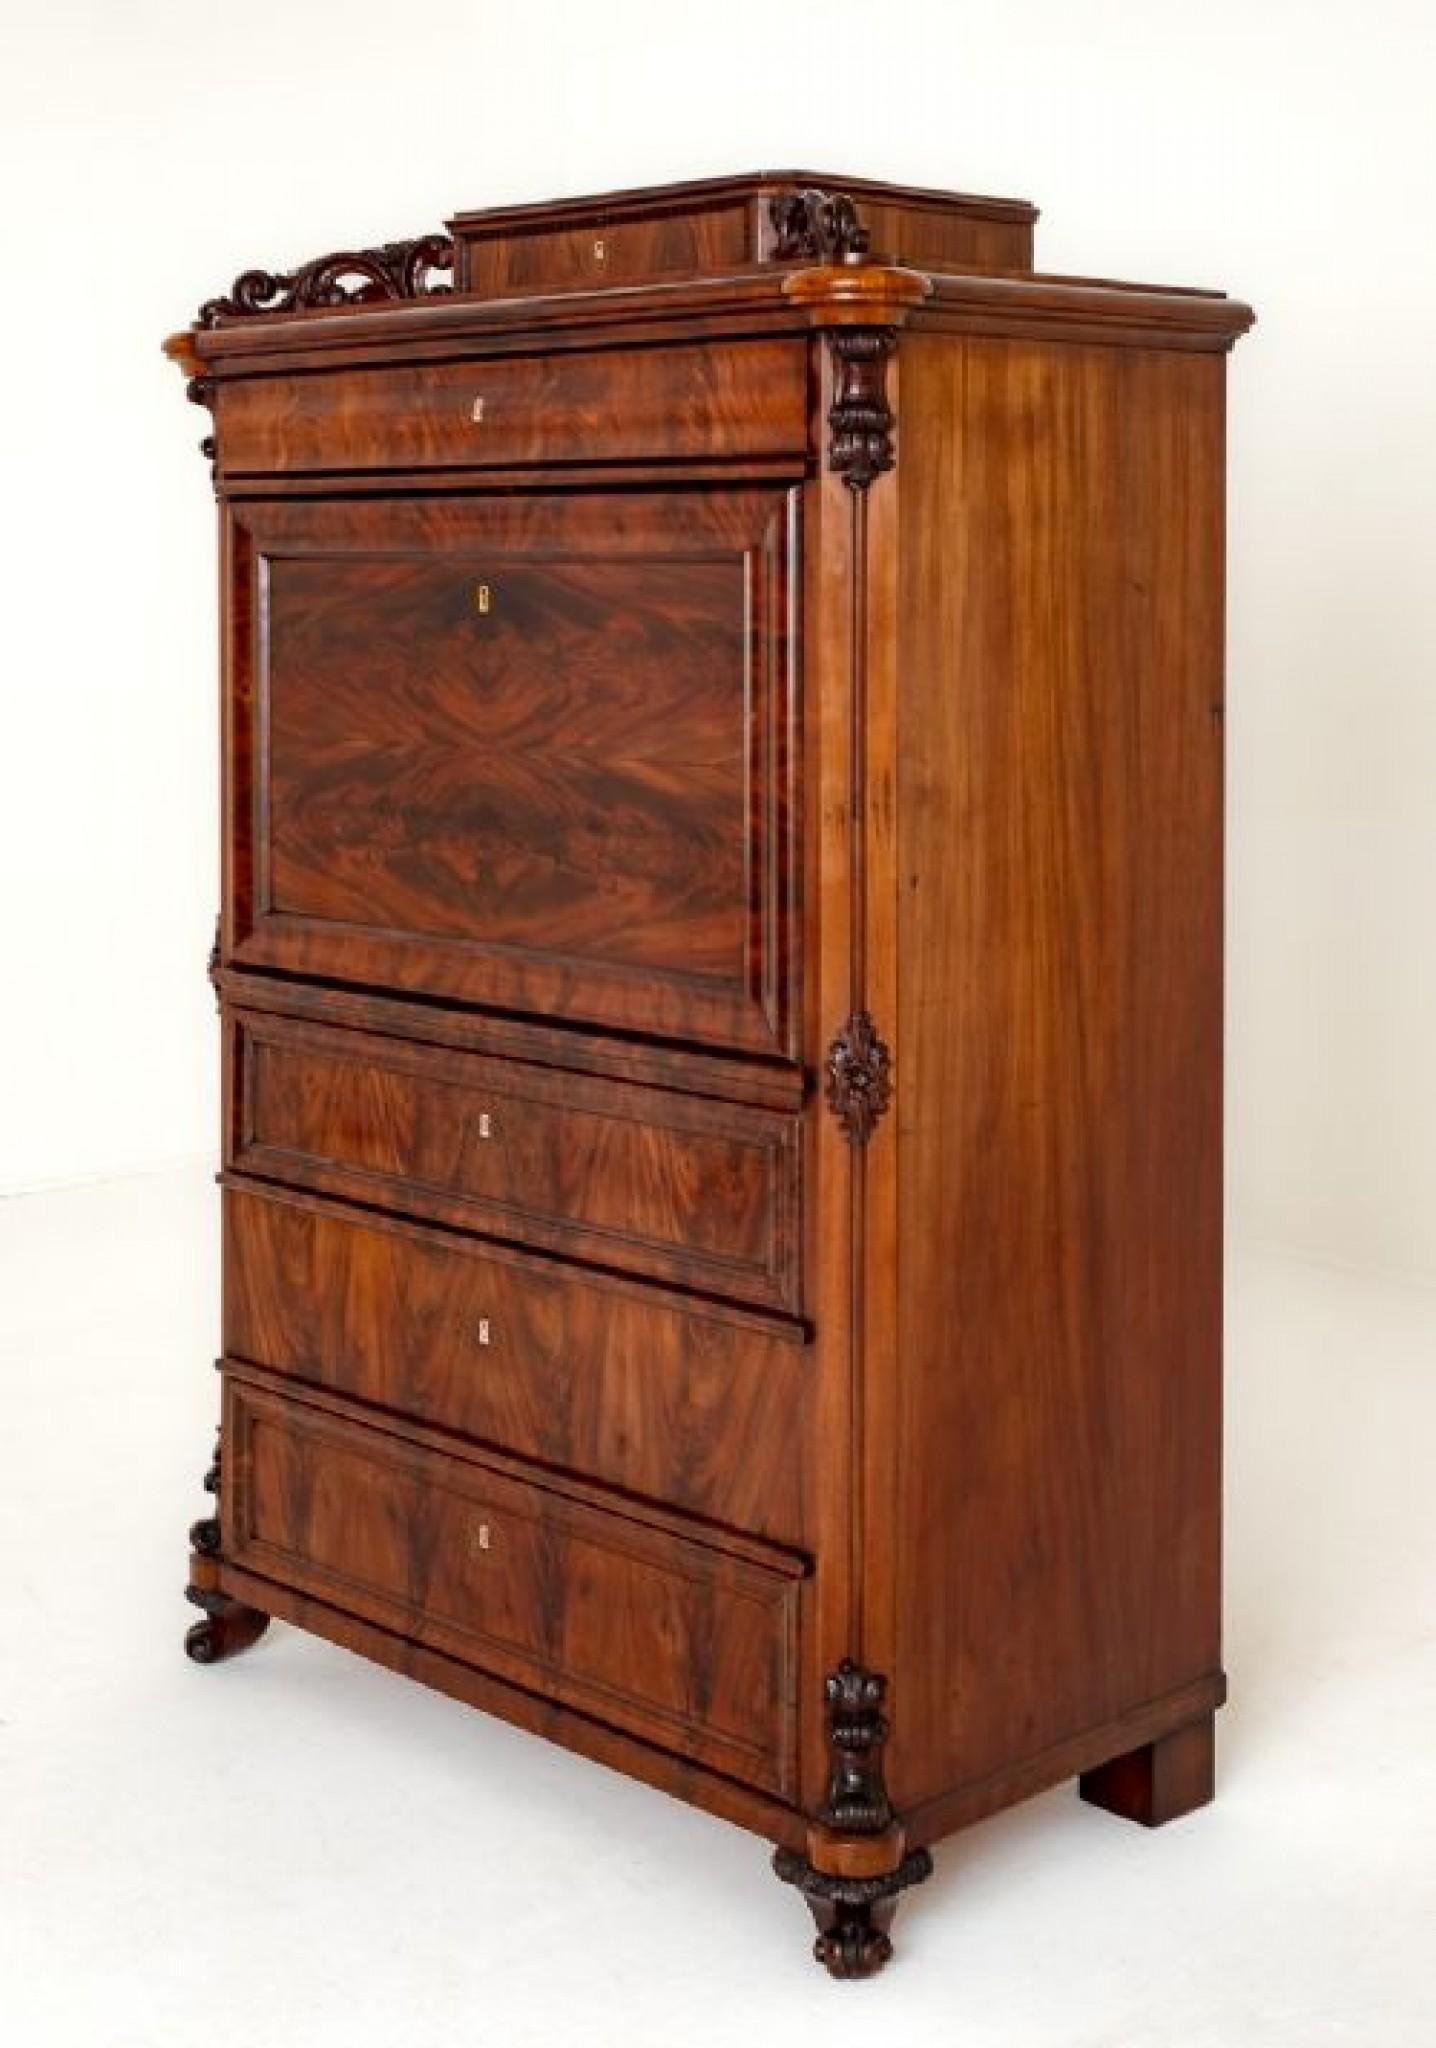 Biedermeier Mahogany Escritoire.
This Escritoire Features 5 Drawers and a Pull Down Writing Slope. Circa 1860
The Drawers and Fall Having Wonderful Matched Flame Mahogany Veneers.
The Piece Standing Upon Small Carved and Shaped Feet.
The Corners